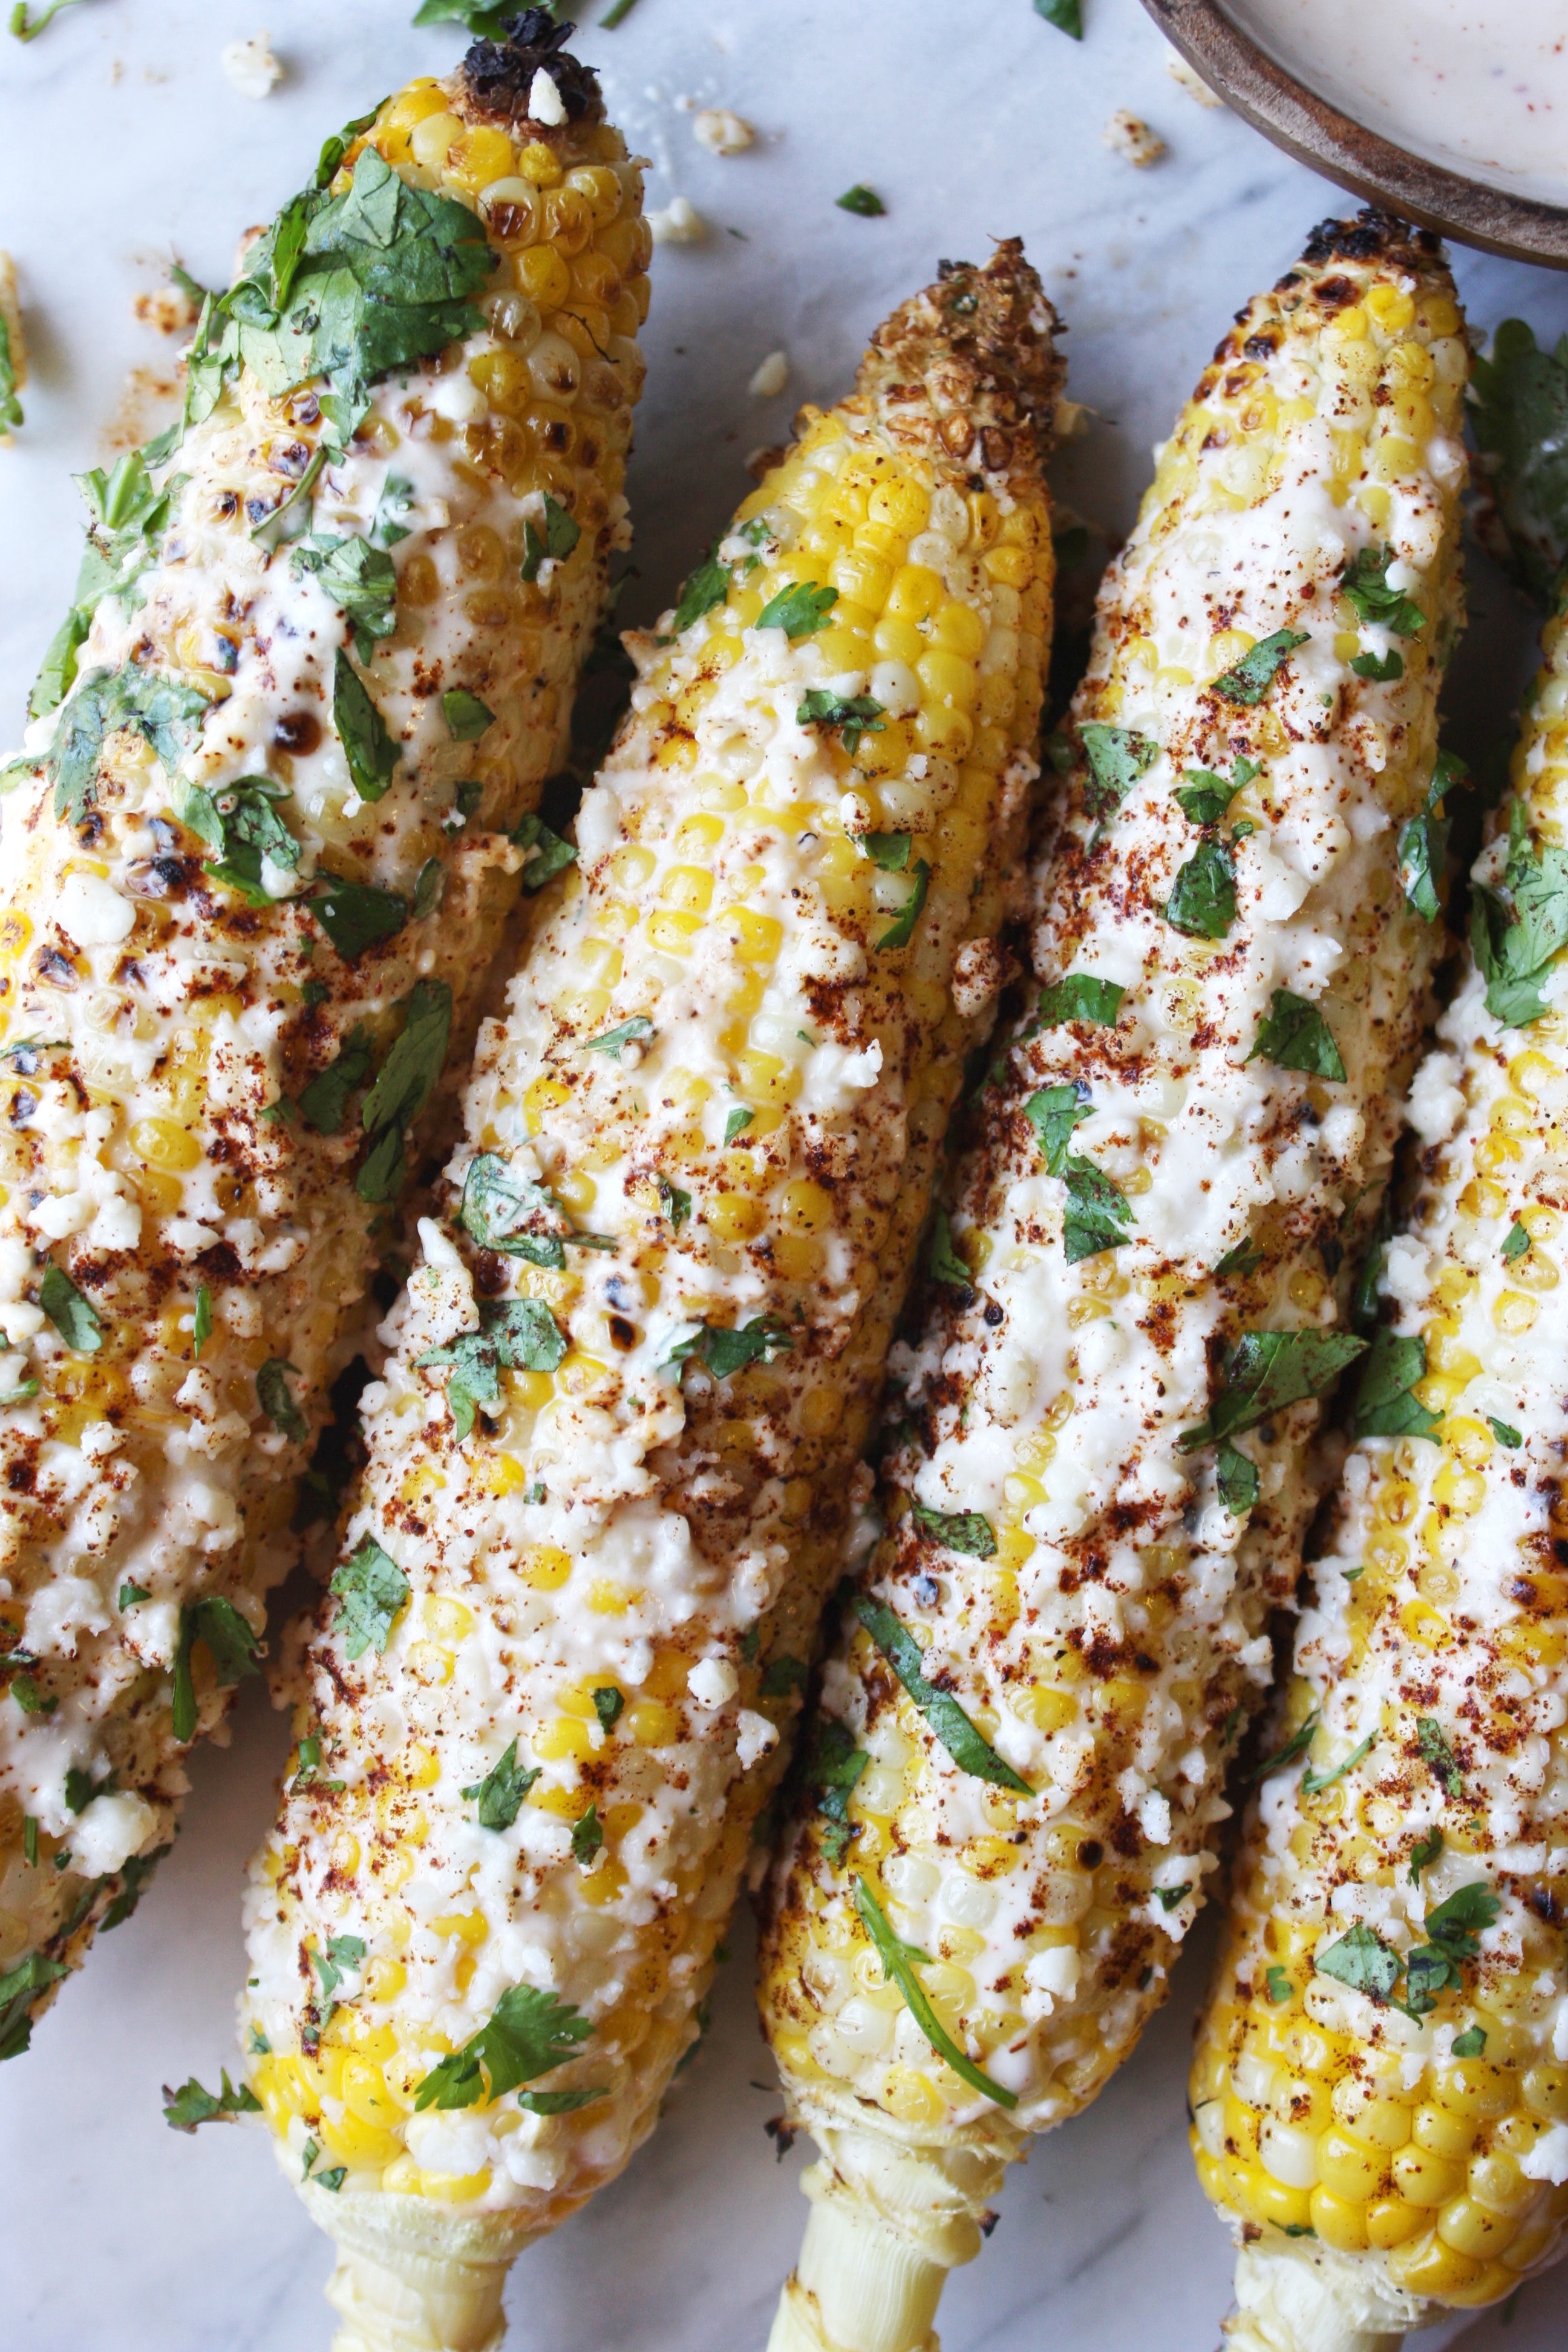 Grilled Mexican Street Corn (Elotes) Recipe